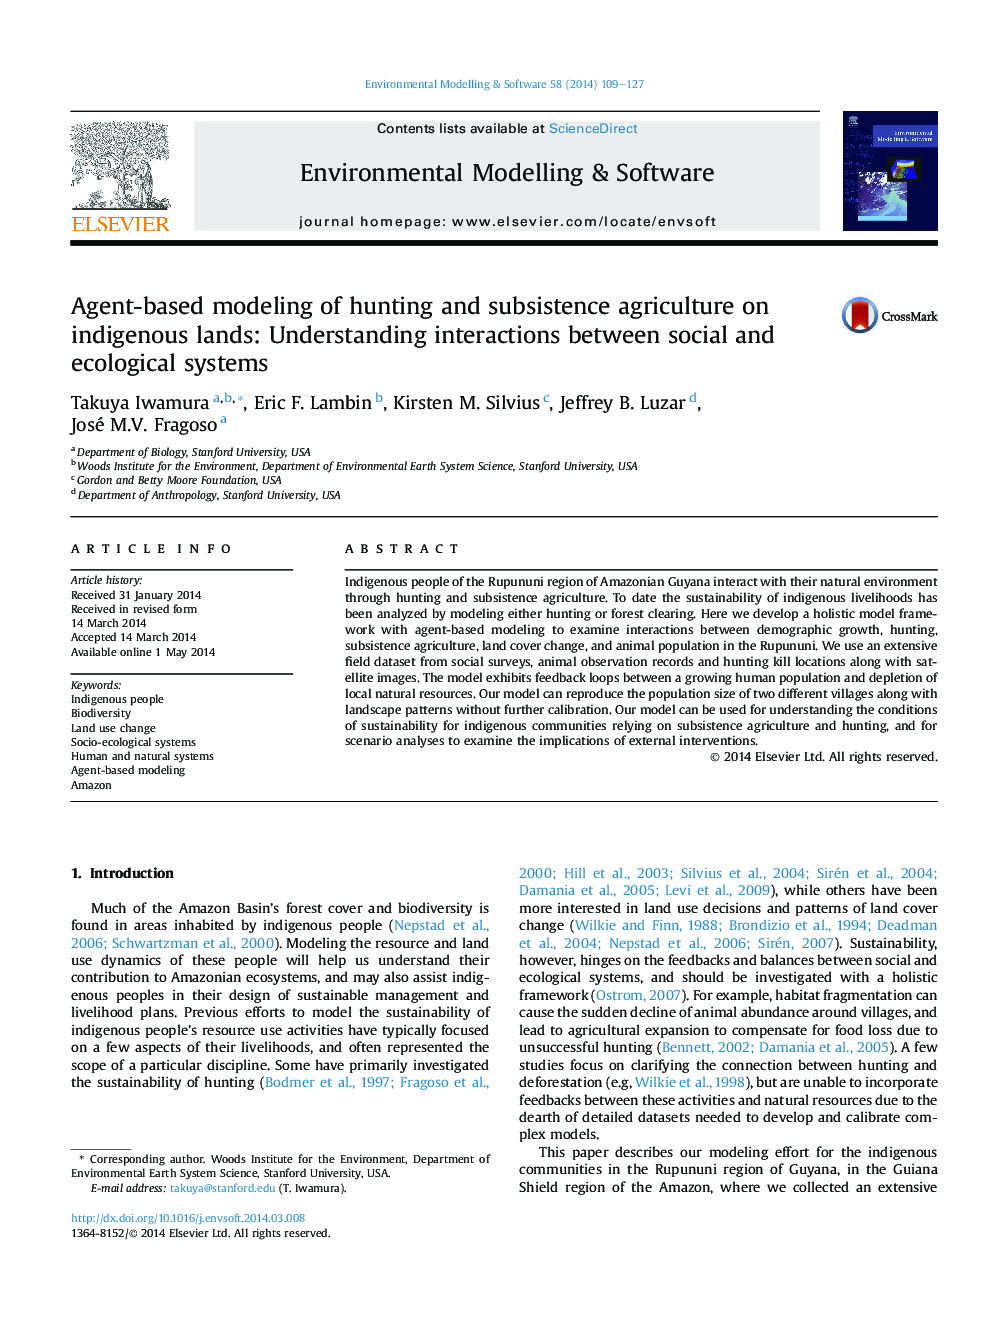 Agent-based modeling of hunting and subsistence agriculture on indigenous lands: Understanding interactions between social and ecological systems